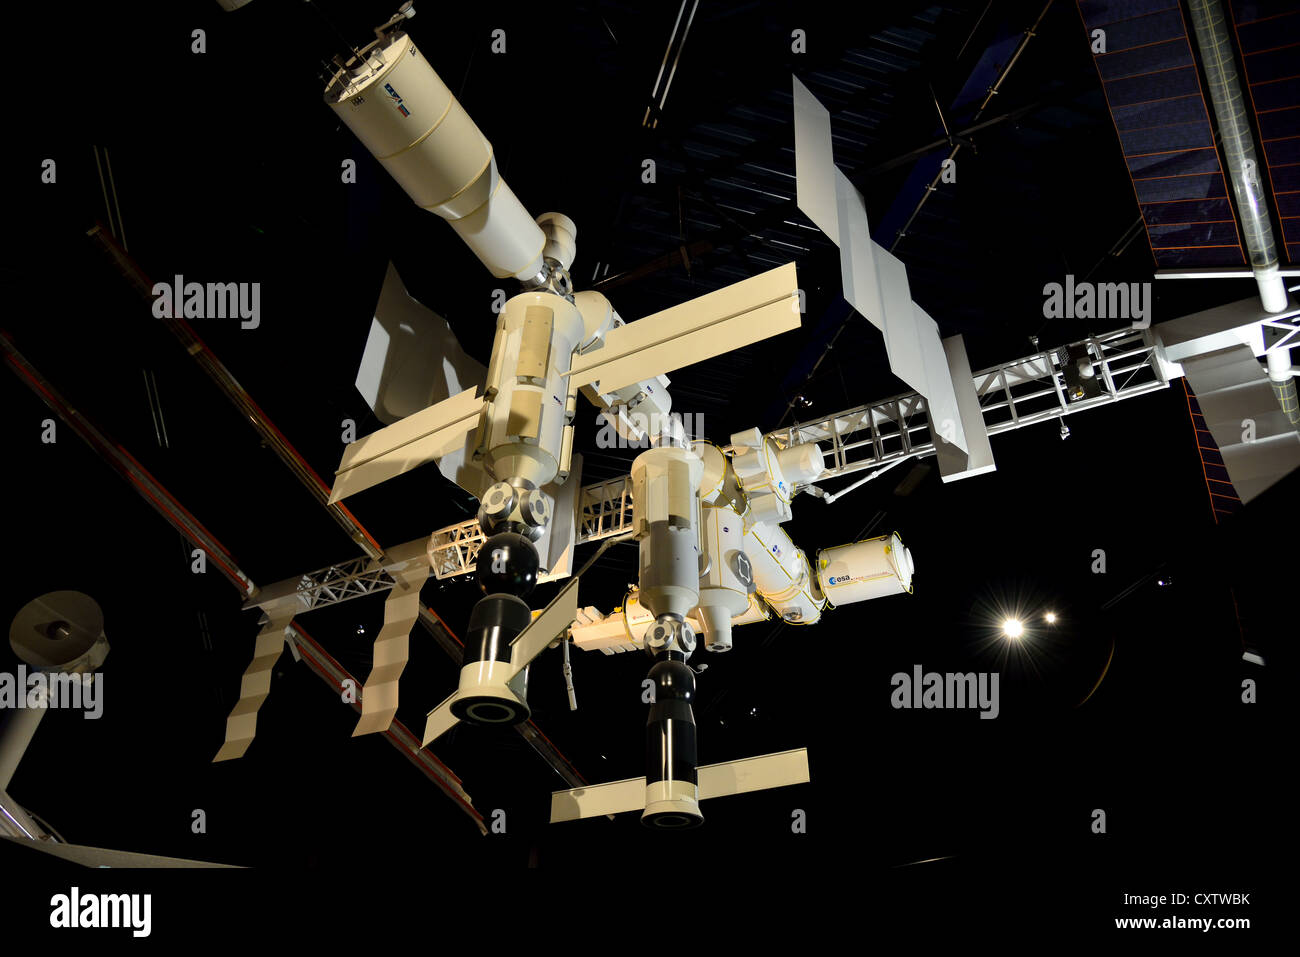 A model of the International Space Station at the Space Expo, Noordwijk, Netherlands. Stock Photo